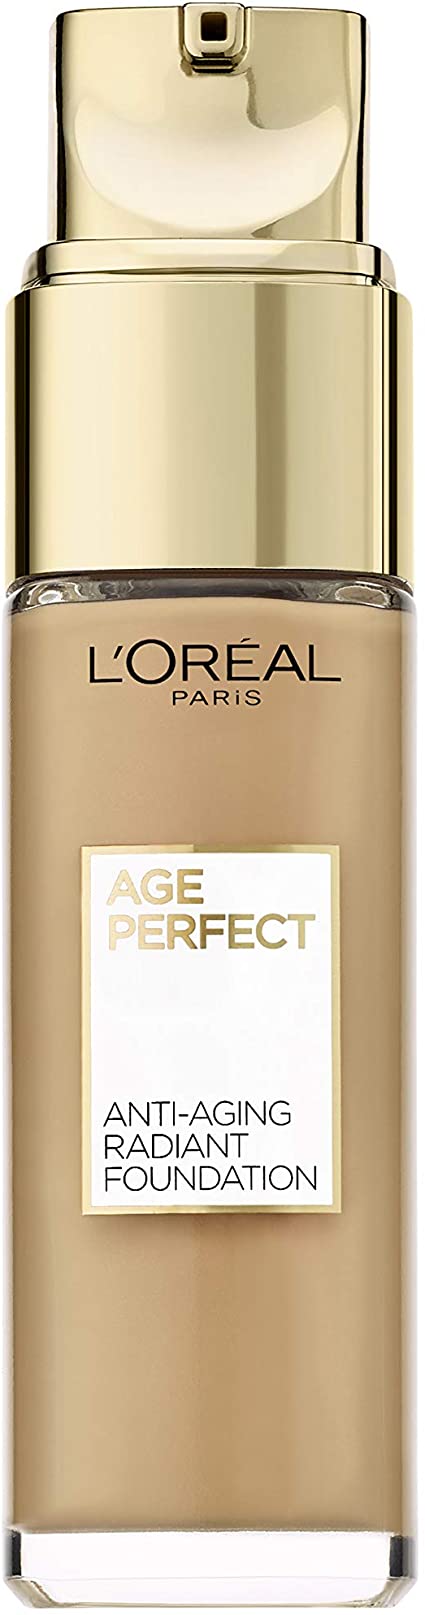 L'Oreal Age Perfect and Illuminate Foundation 270 Amber Beige, 30ml - Beautynstyle